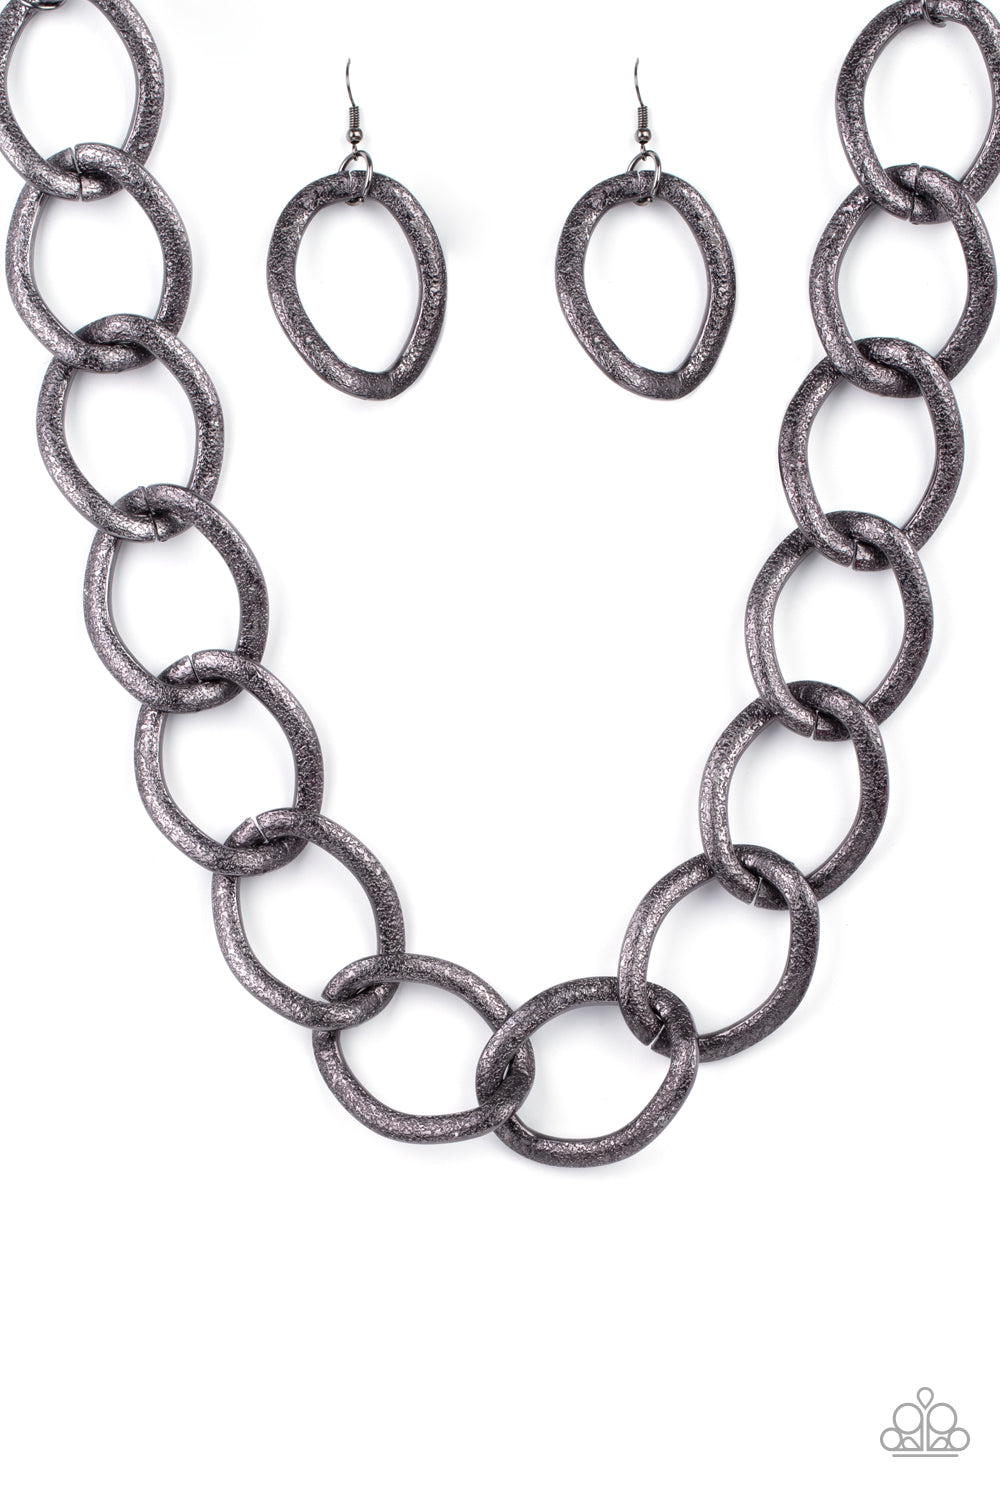 Industrial Intimidation Black Necklace - Paparazzi Accessories  Surprisingly lightweight, enormous hematite links create an intimidating statement as they circle around the collar. The contoured, textured links have a distinctly industrial vibe that demands a second look. Features an adjustable clasp closure.  All Paparazzi Accessories are lead free and nickel free!  Sold as one individual necklace. Includes one pair of matching earrings.